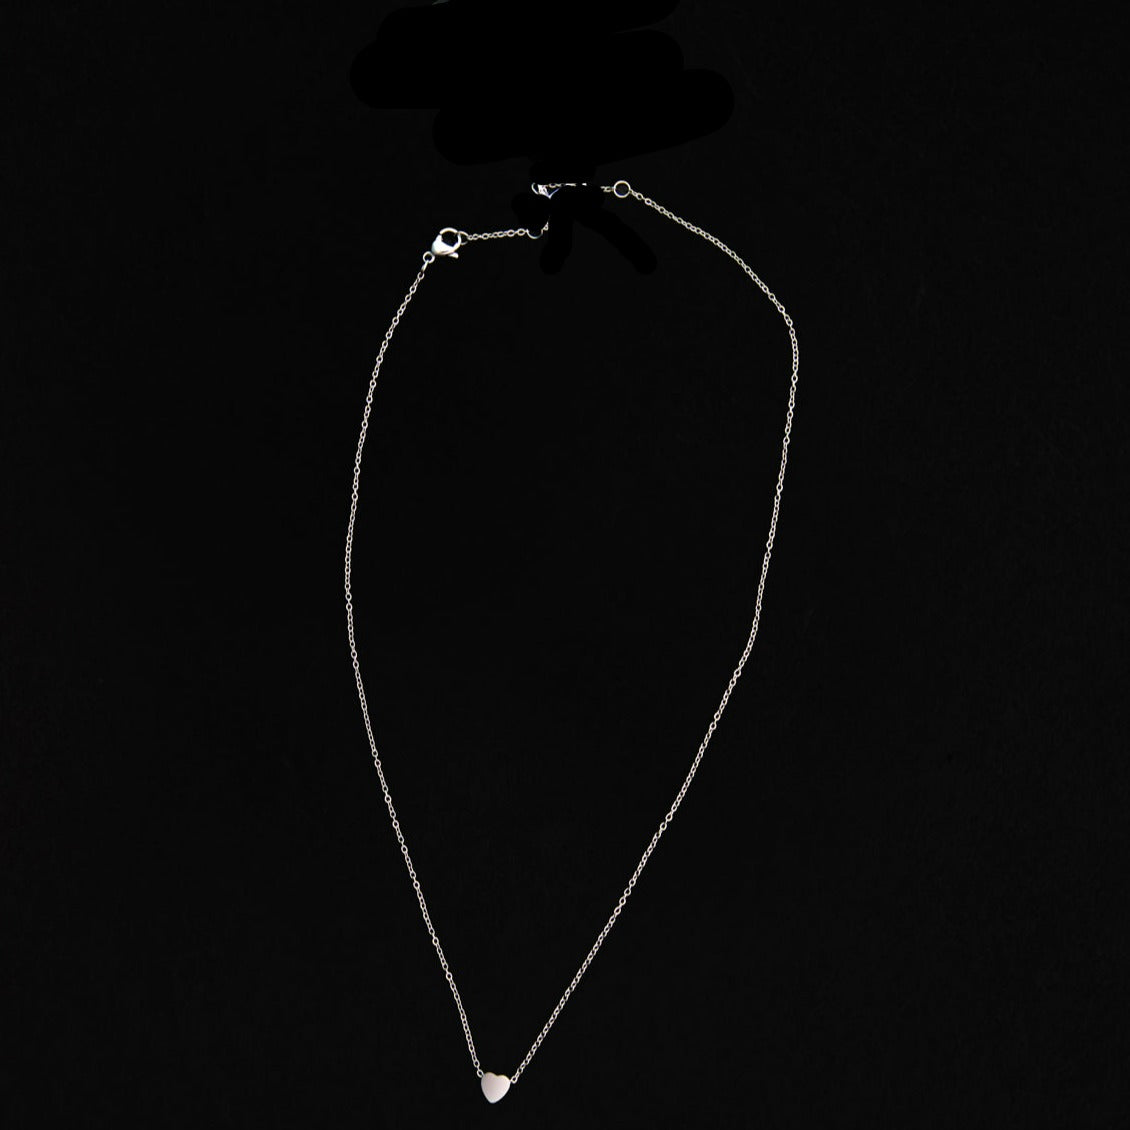 Petite Belle Necklace in Silver